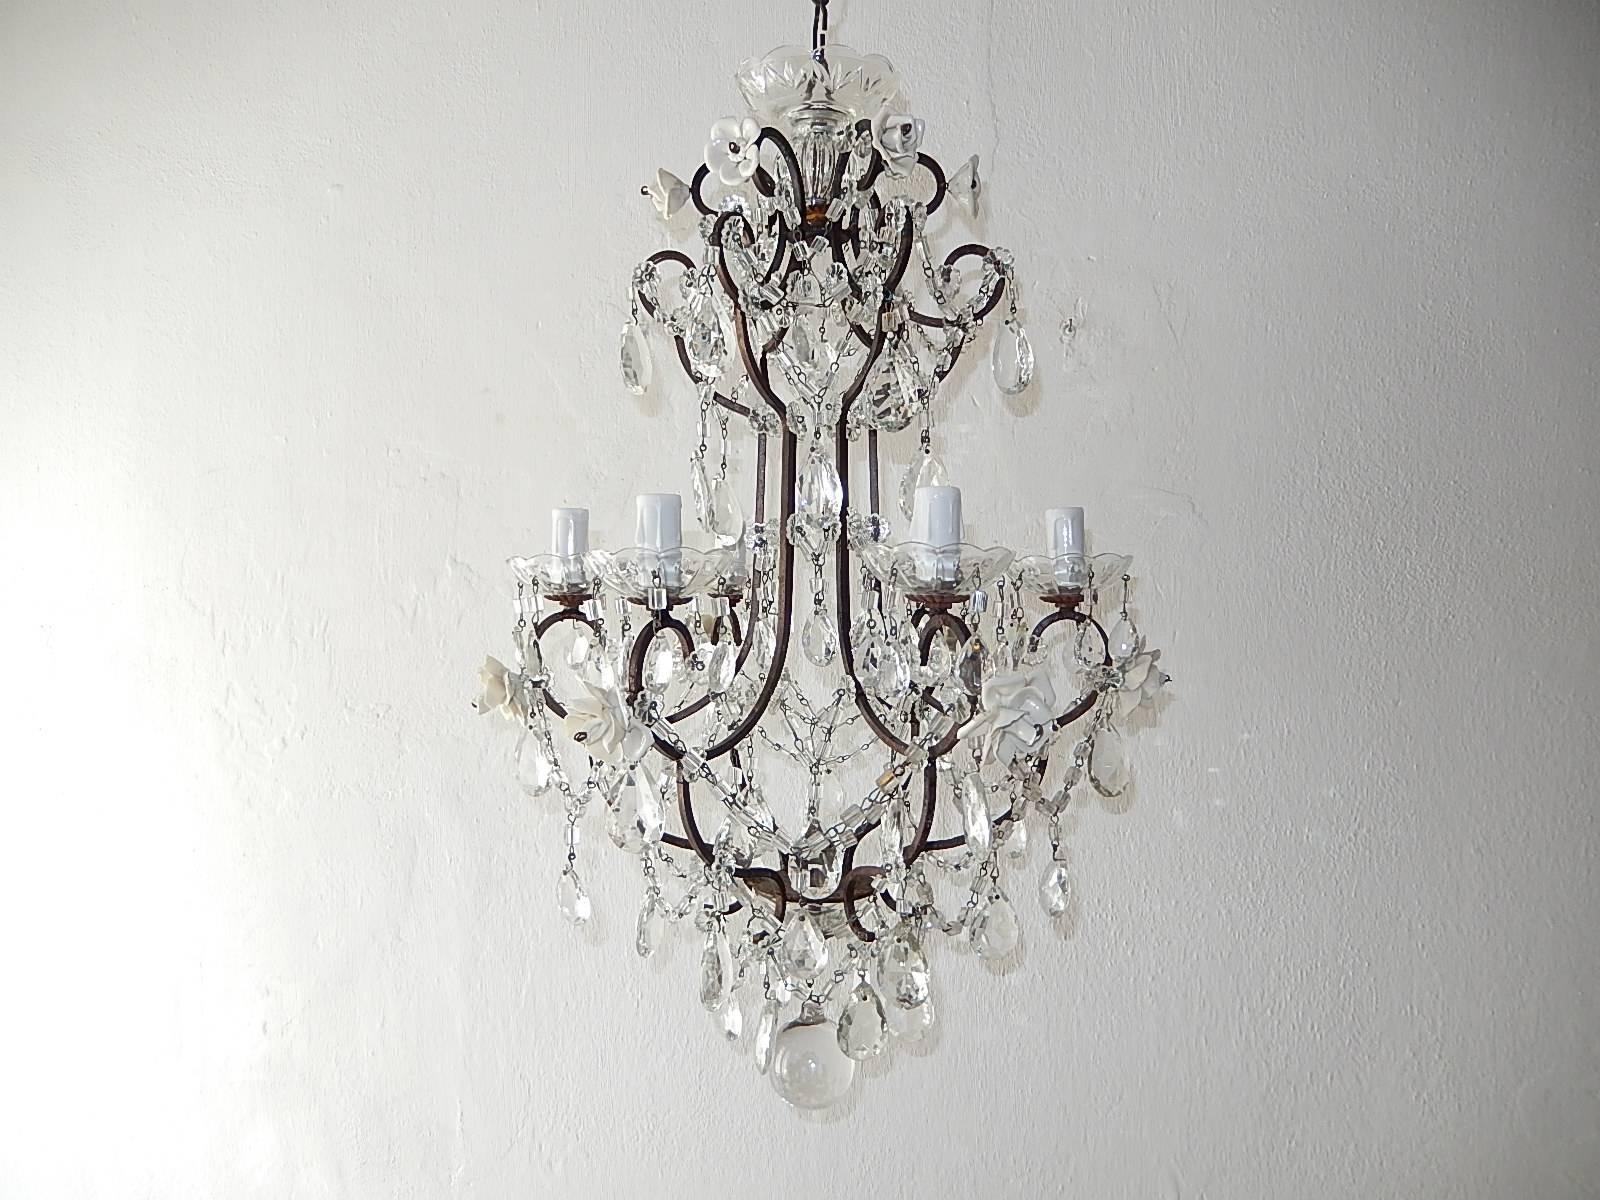 Housing six-light, sitting in crystal bobeches, dripping with vintage crystal prisms. Rewired and ready to hang. Dark patina metal frame with swags of crystal macaroni beads and prisms throughout. Adorning handmade French white porcelain roses and